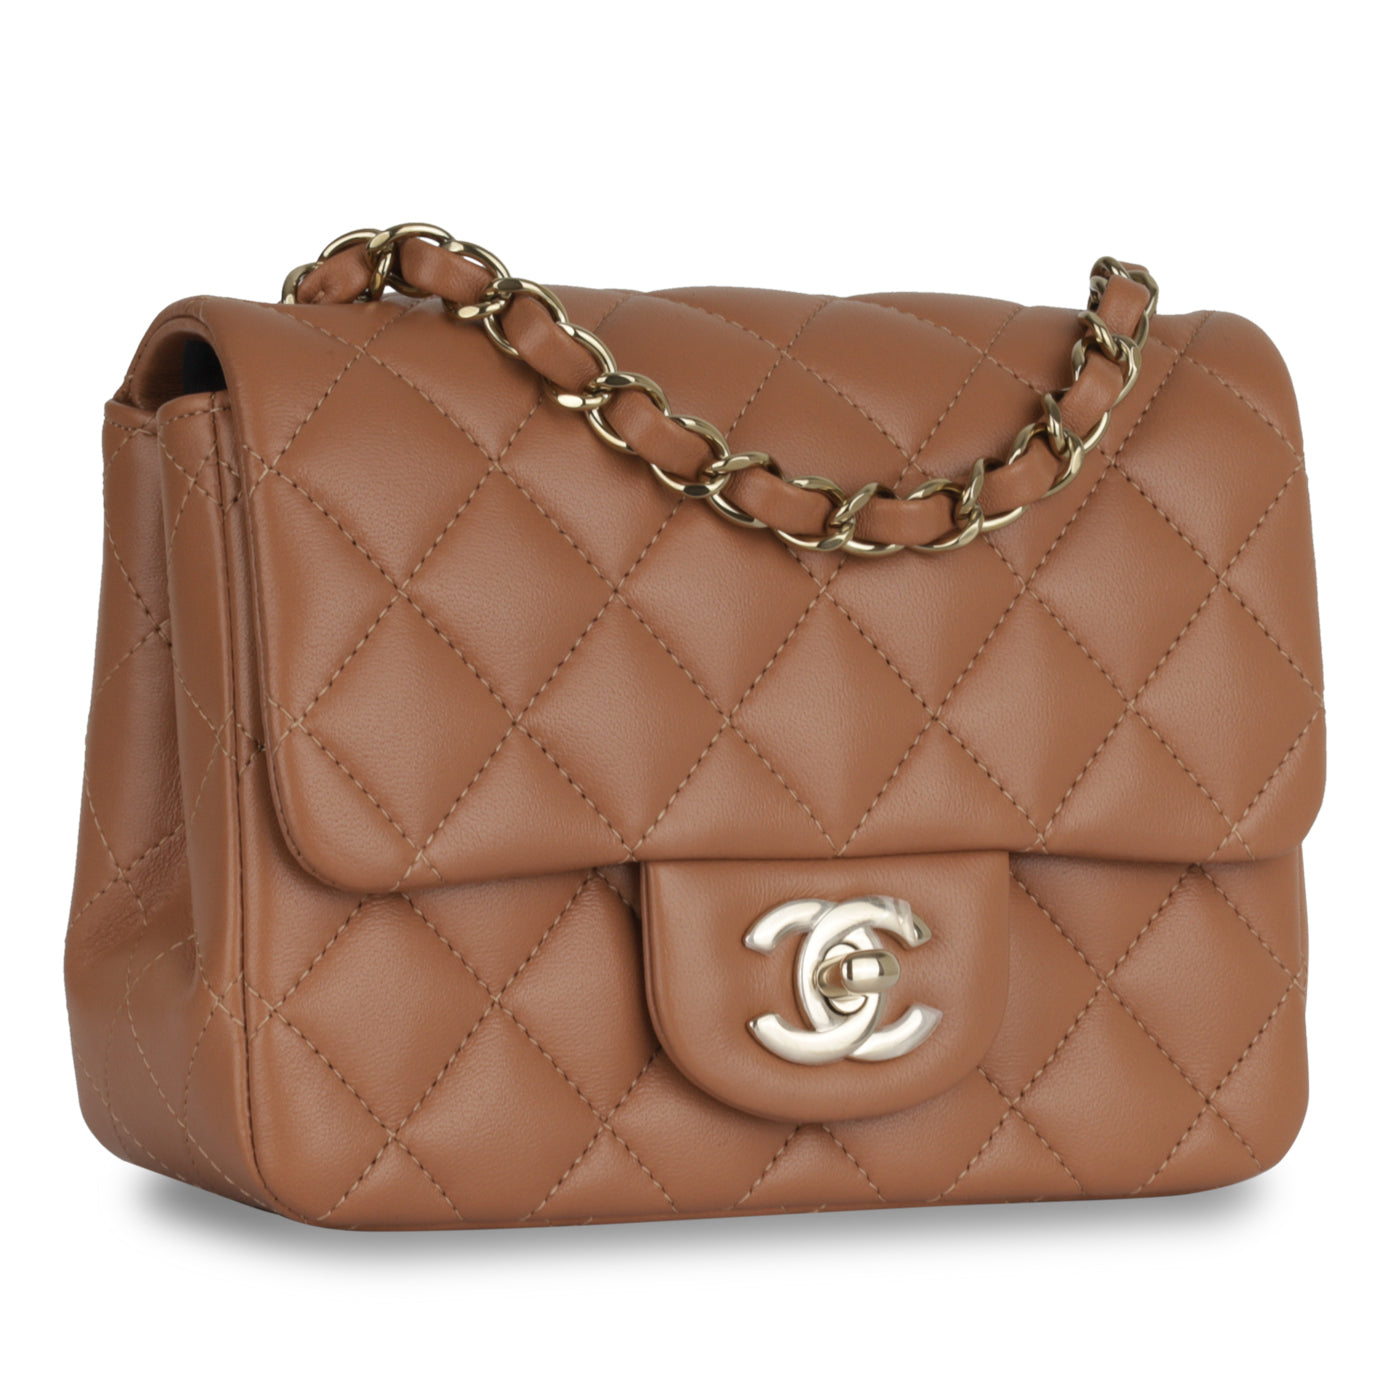 A history of the 2021p brown Chanel and vintage Chanel incaramel